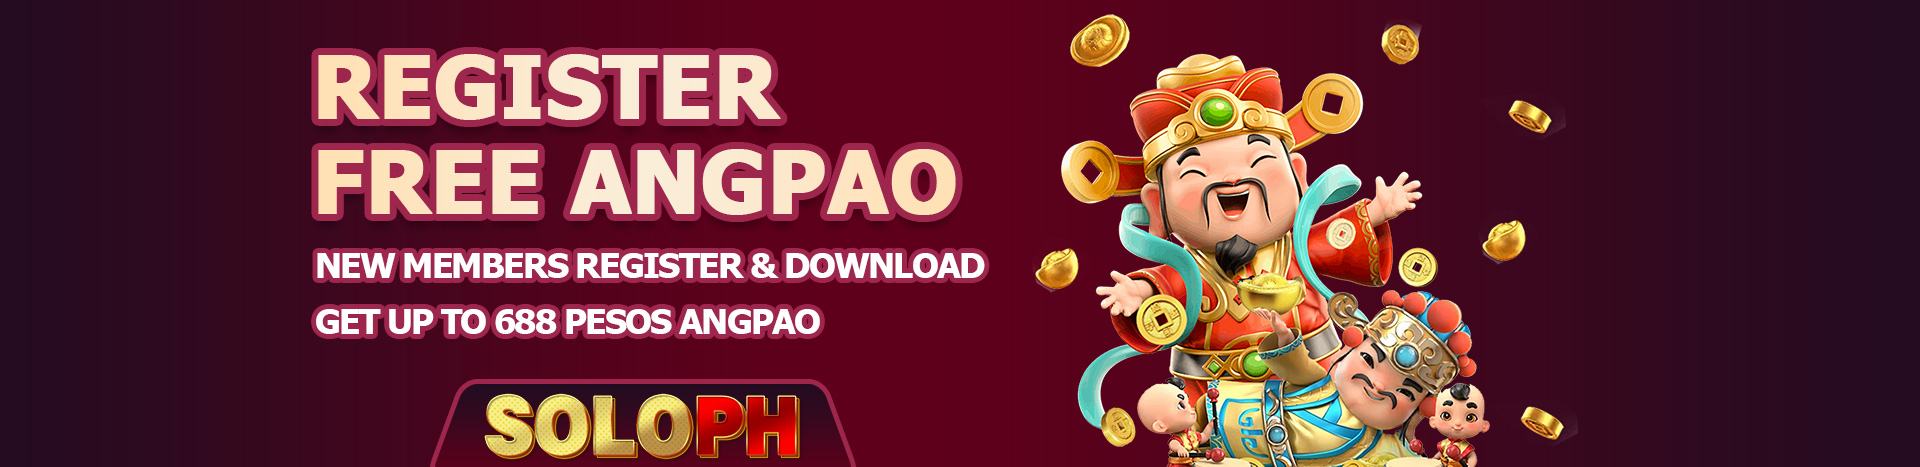 soloph register free angpao banner